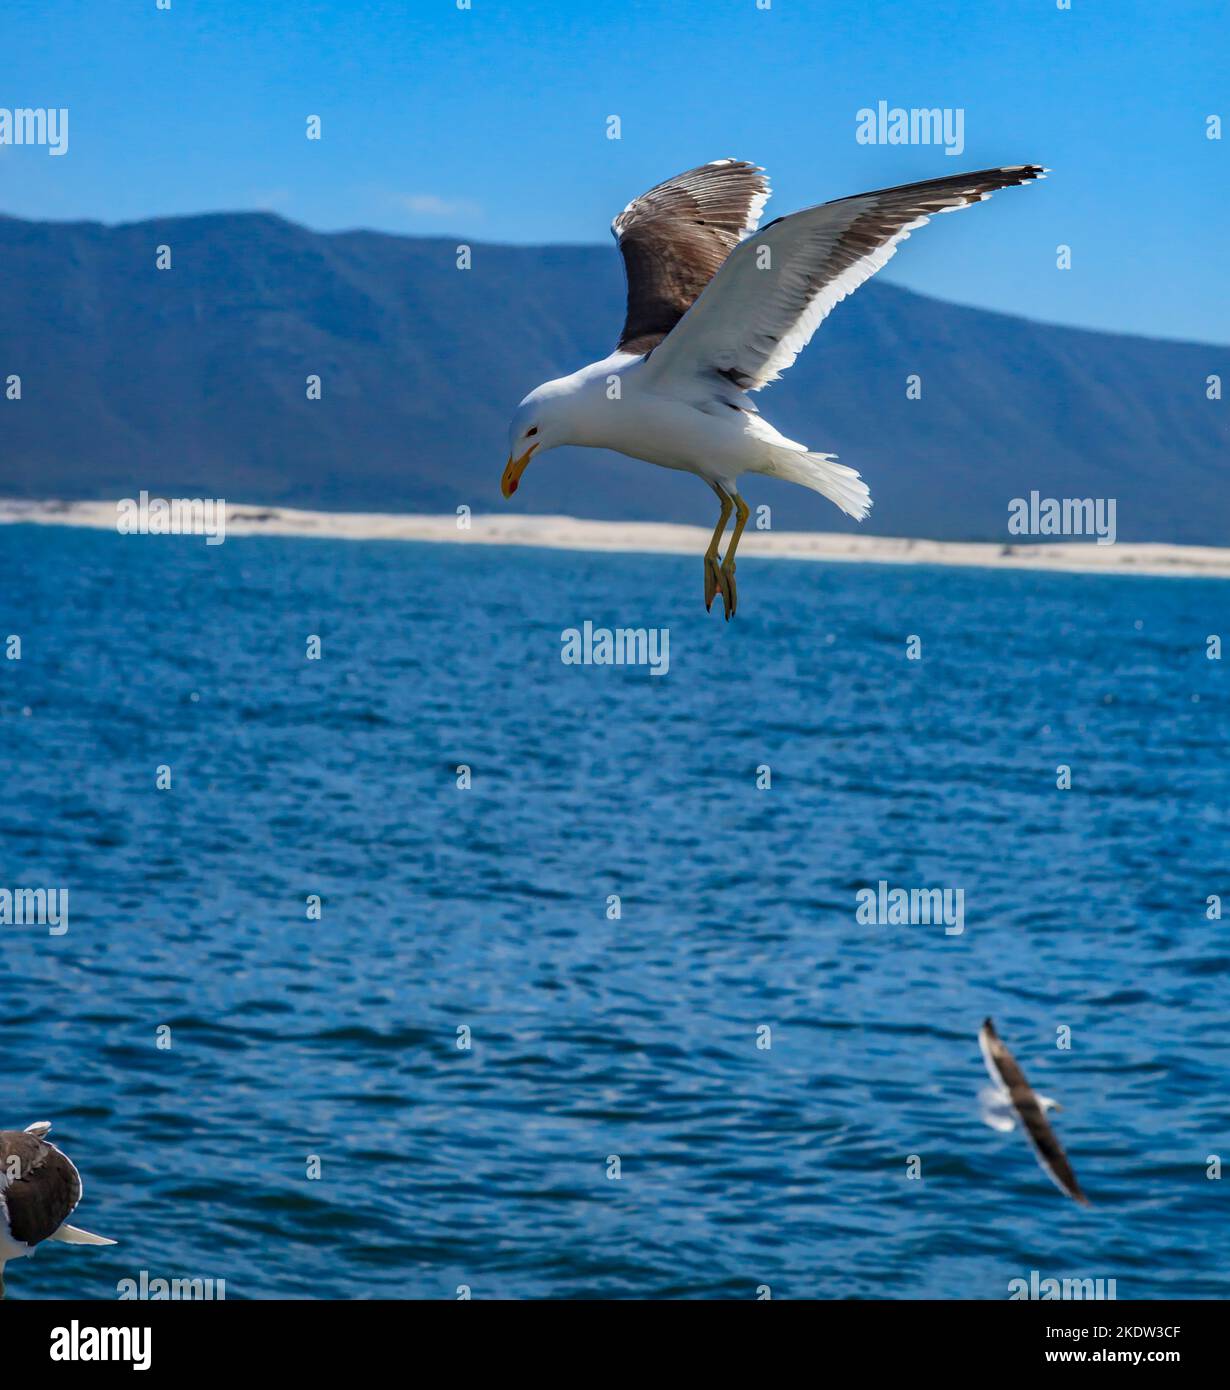 Close up picture of a flying seagull over water during daytime Stock Photo